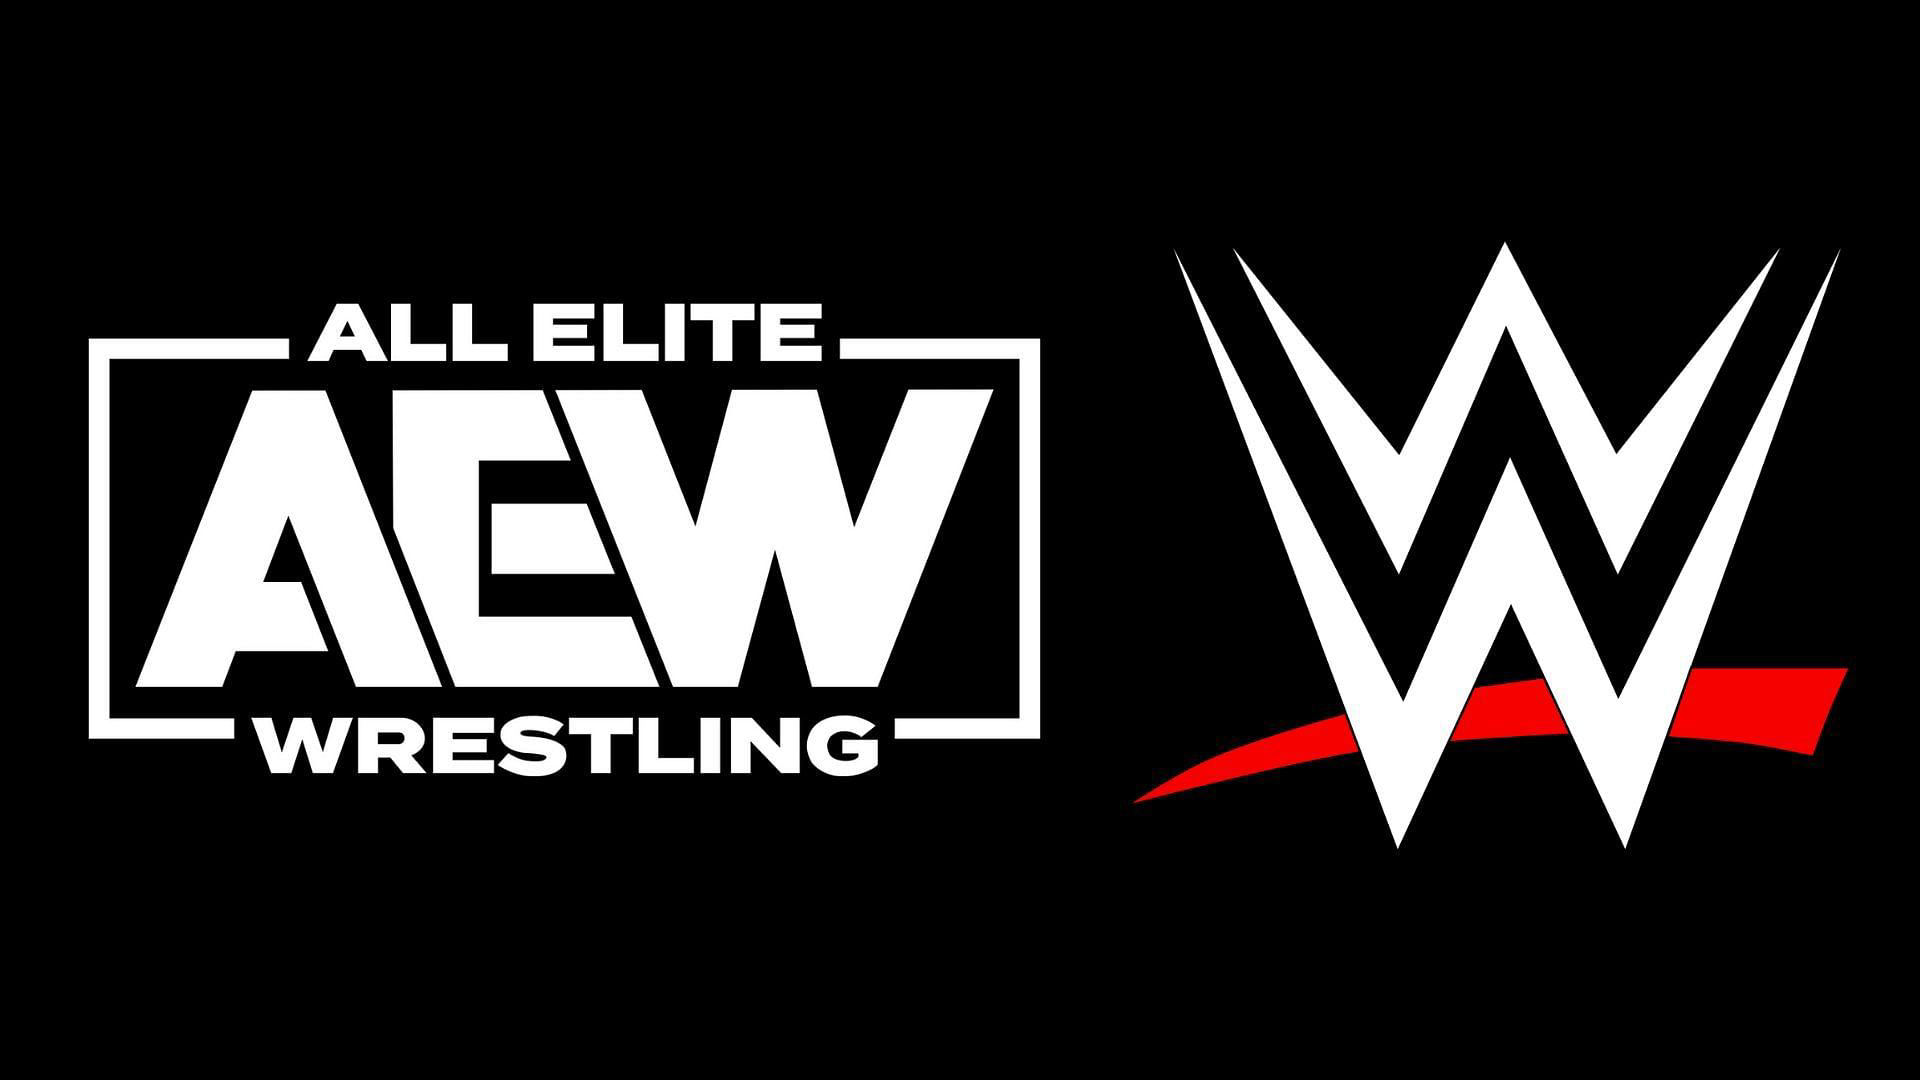 Mark your calendars! Major AEW and WWE shows to clash and reignite head